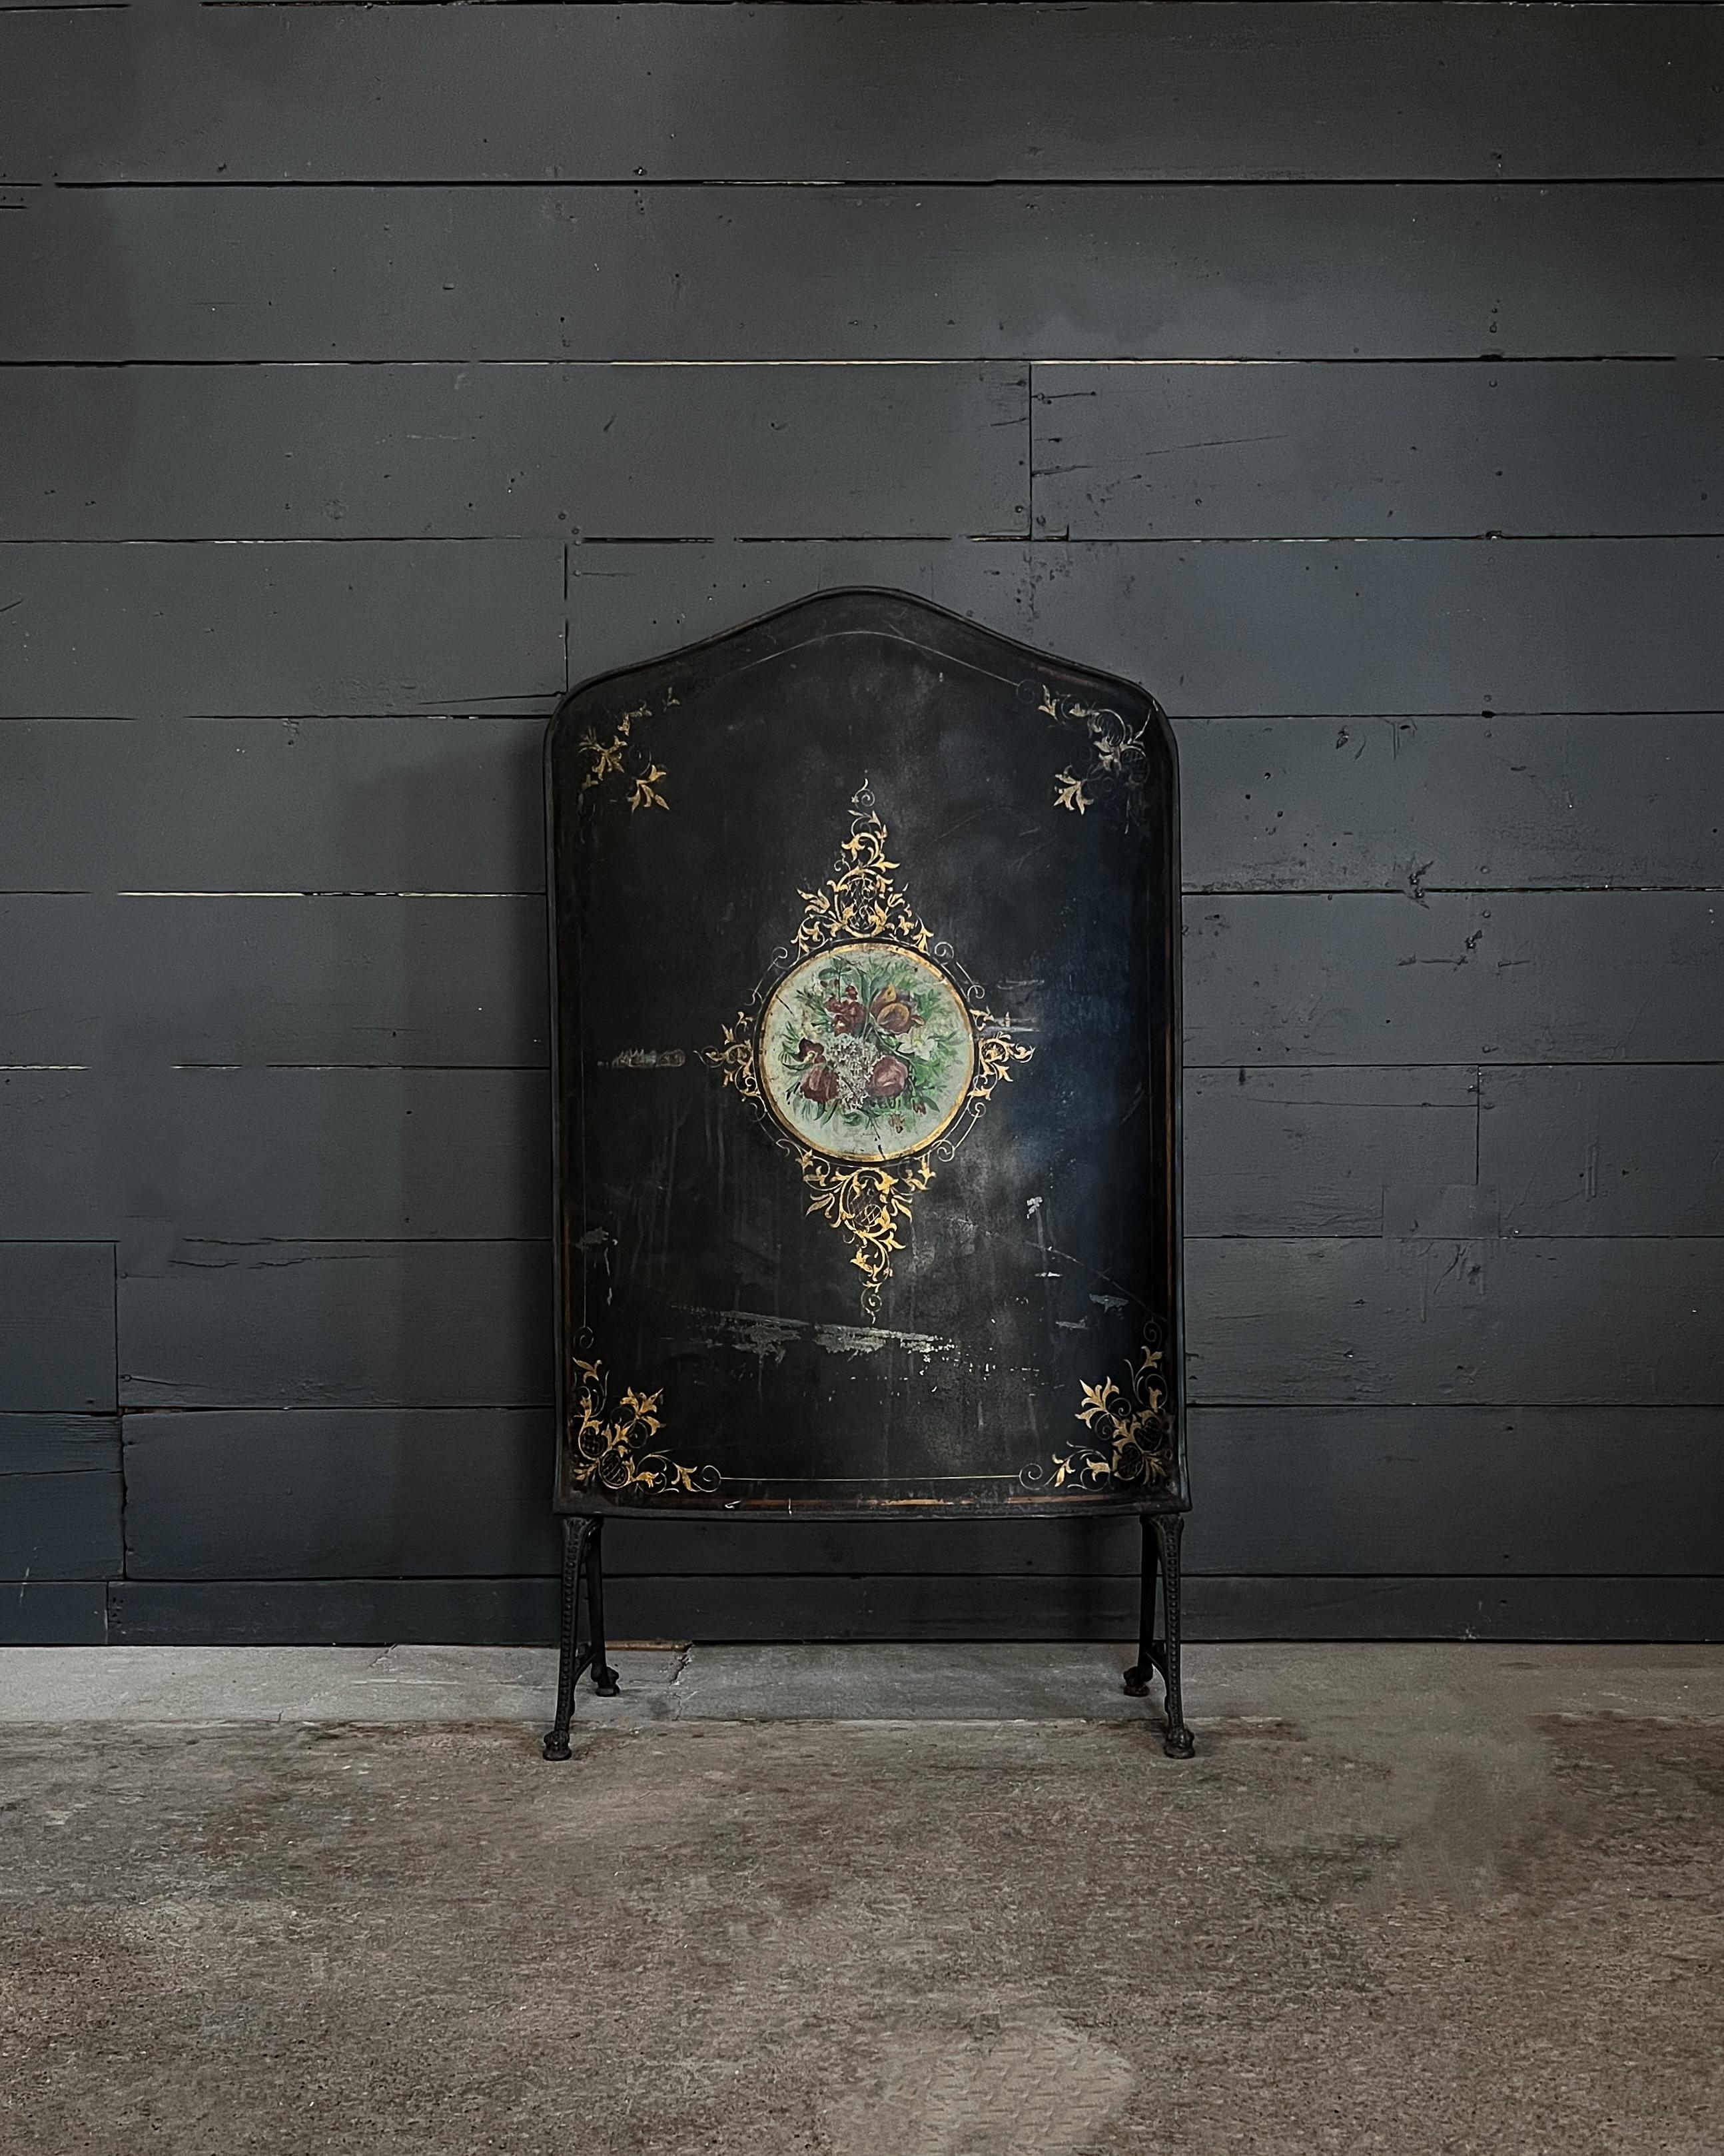 Once used to shield homeowners and their guests from extreme heat and burning embers, fire screens also served as mere decorative pieces covering the opening of a fireplace to improve the appearance of a room.

This beautiful Victorian tole fire